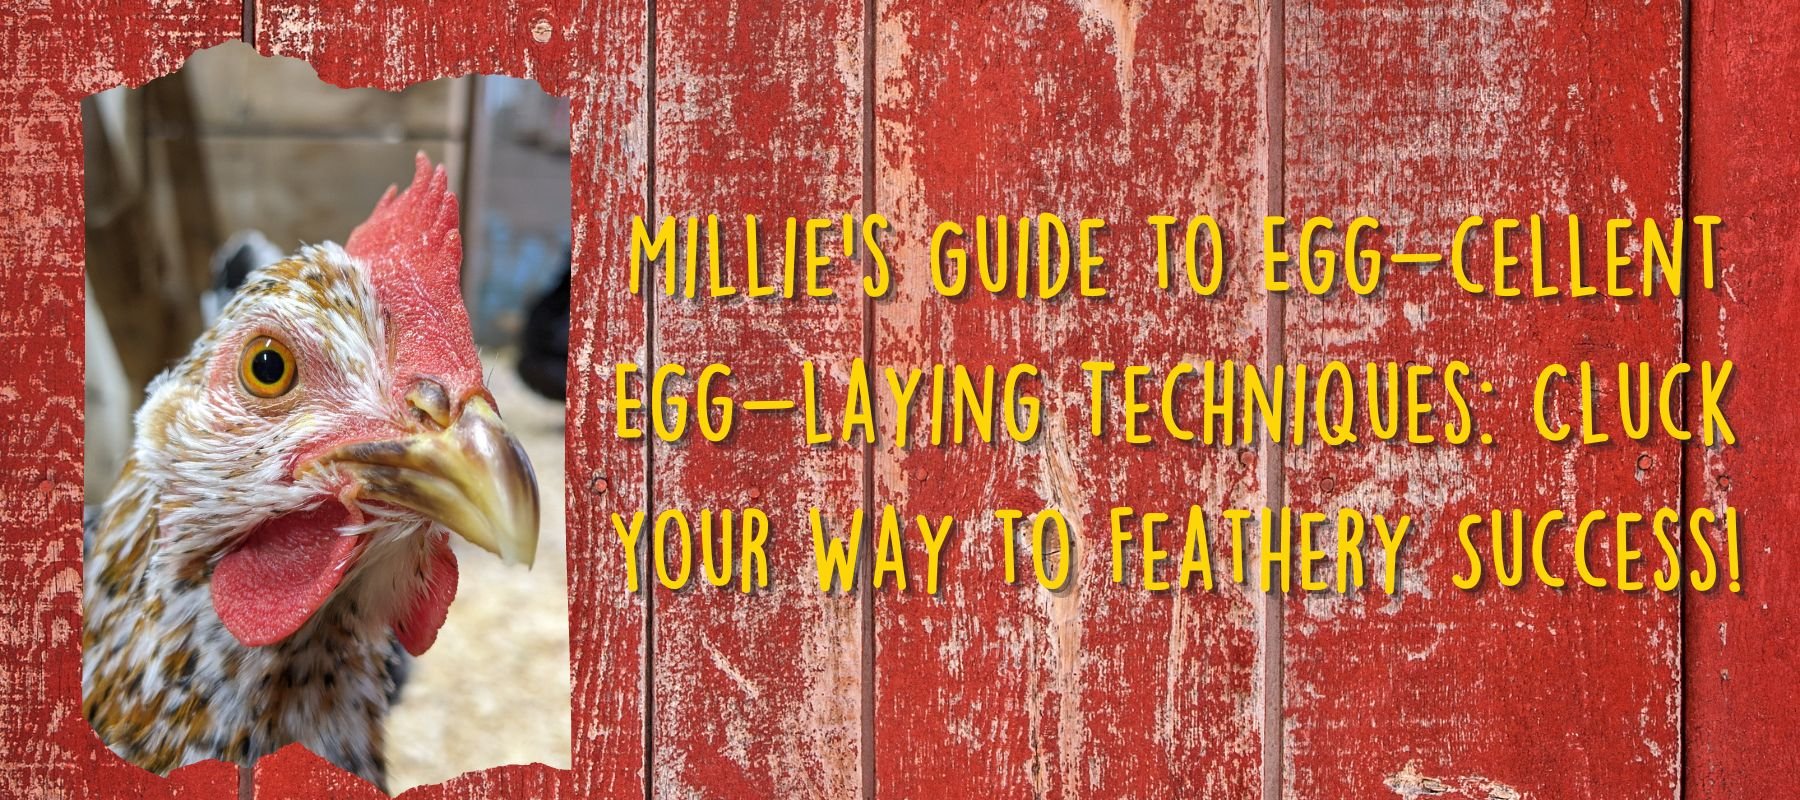 Millie's Guide to Egg-cellent Egg-laying Techniques: Cluck Your Way to Feathery Success! - Cluck It All Farms